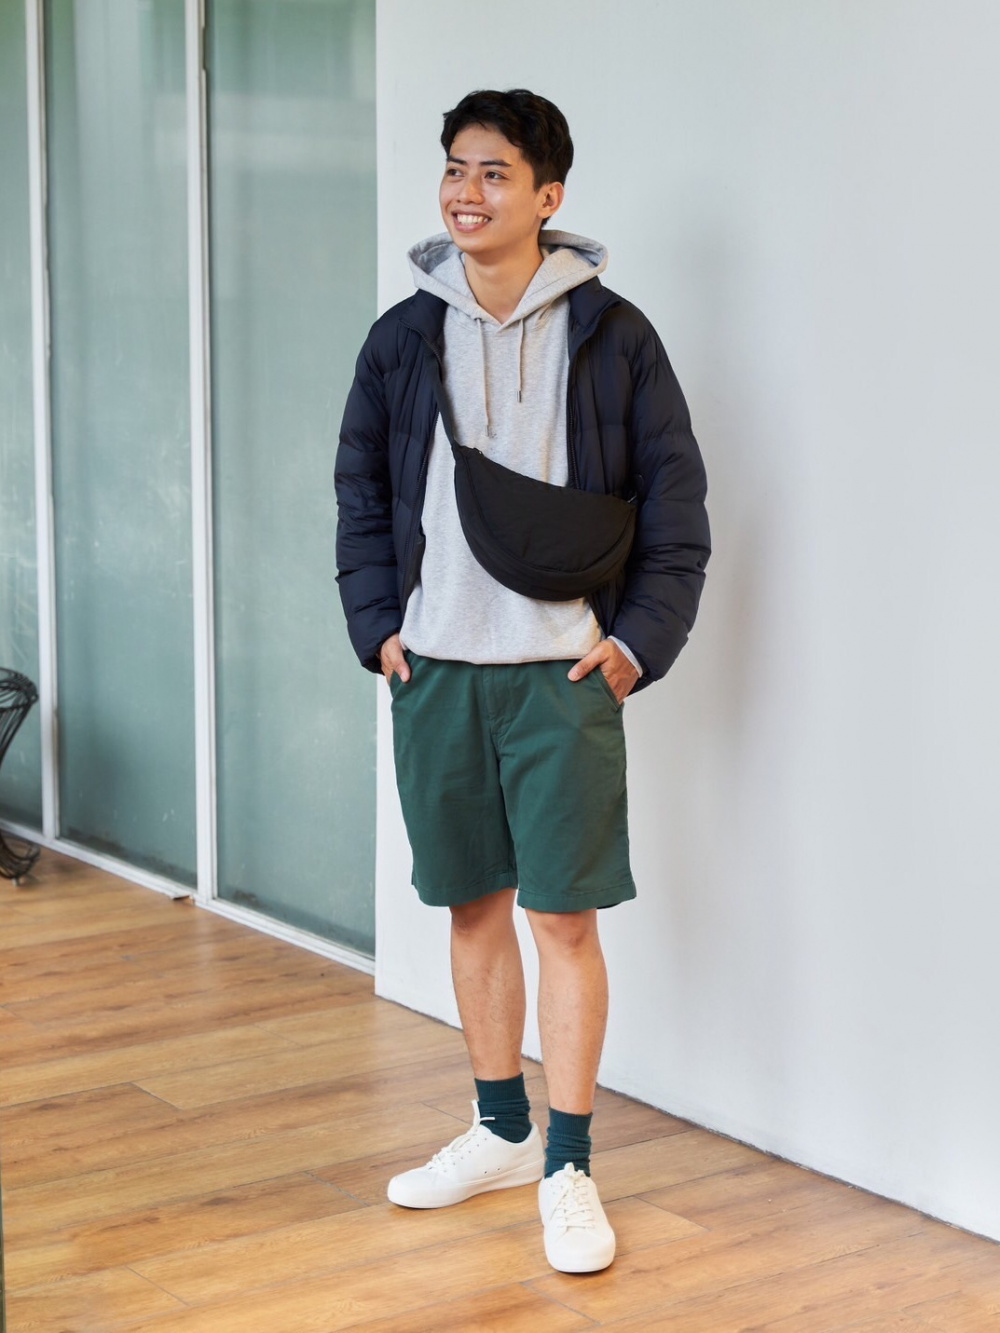 Check styling ideas for「Chino Shorts (length 21 - 25 cm)*、Round